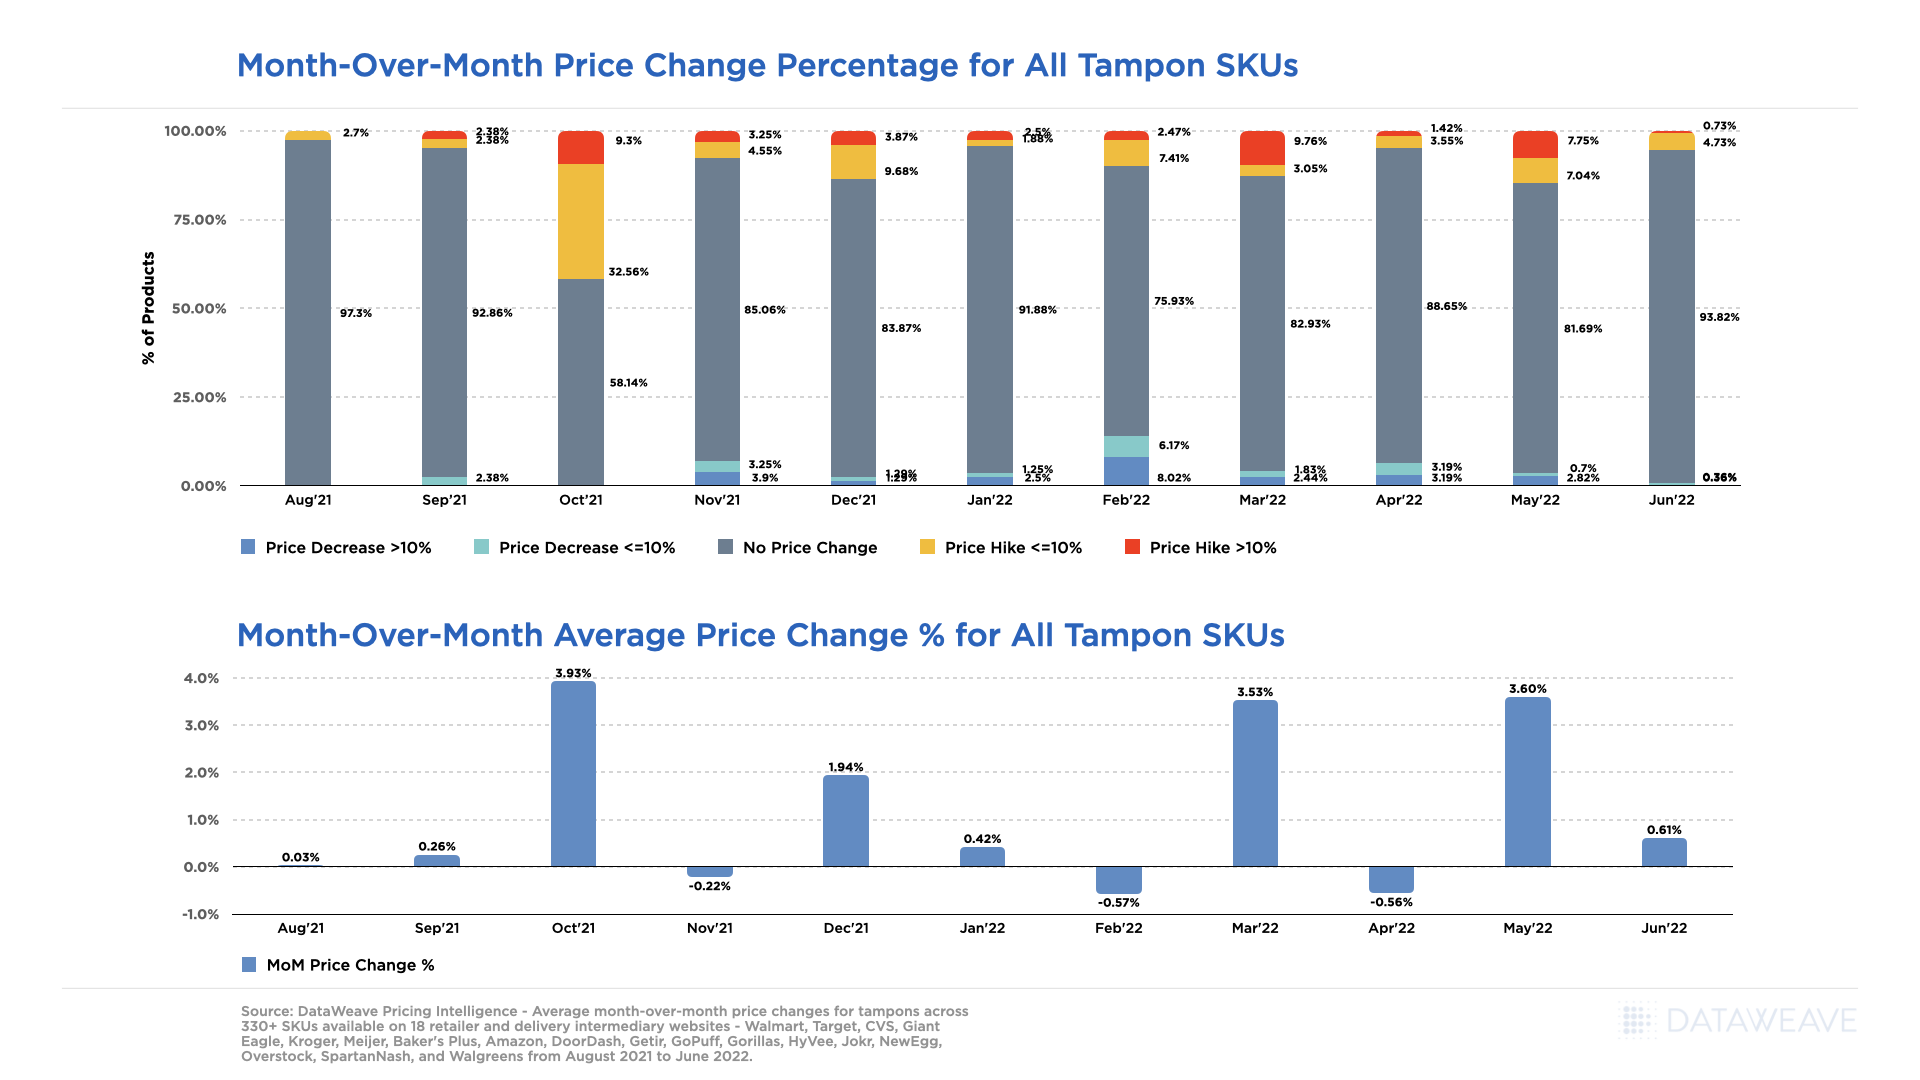 Month-Over-Month Price Changes for Tampons - June 2022